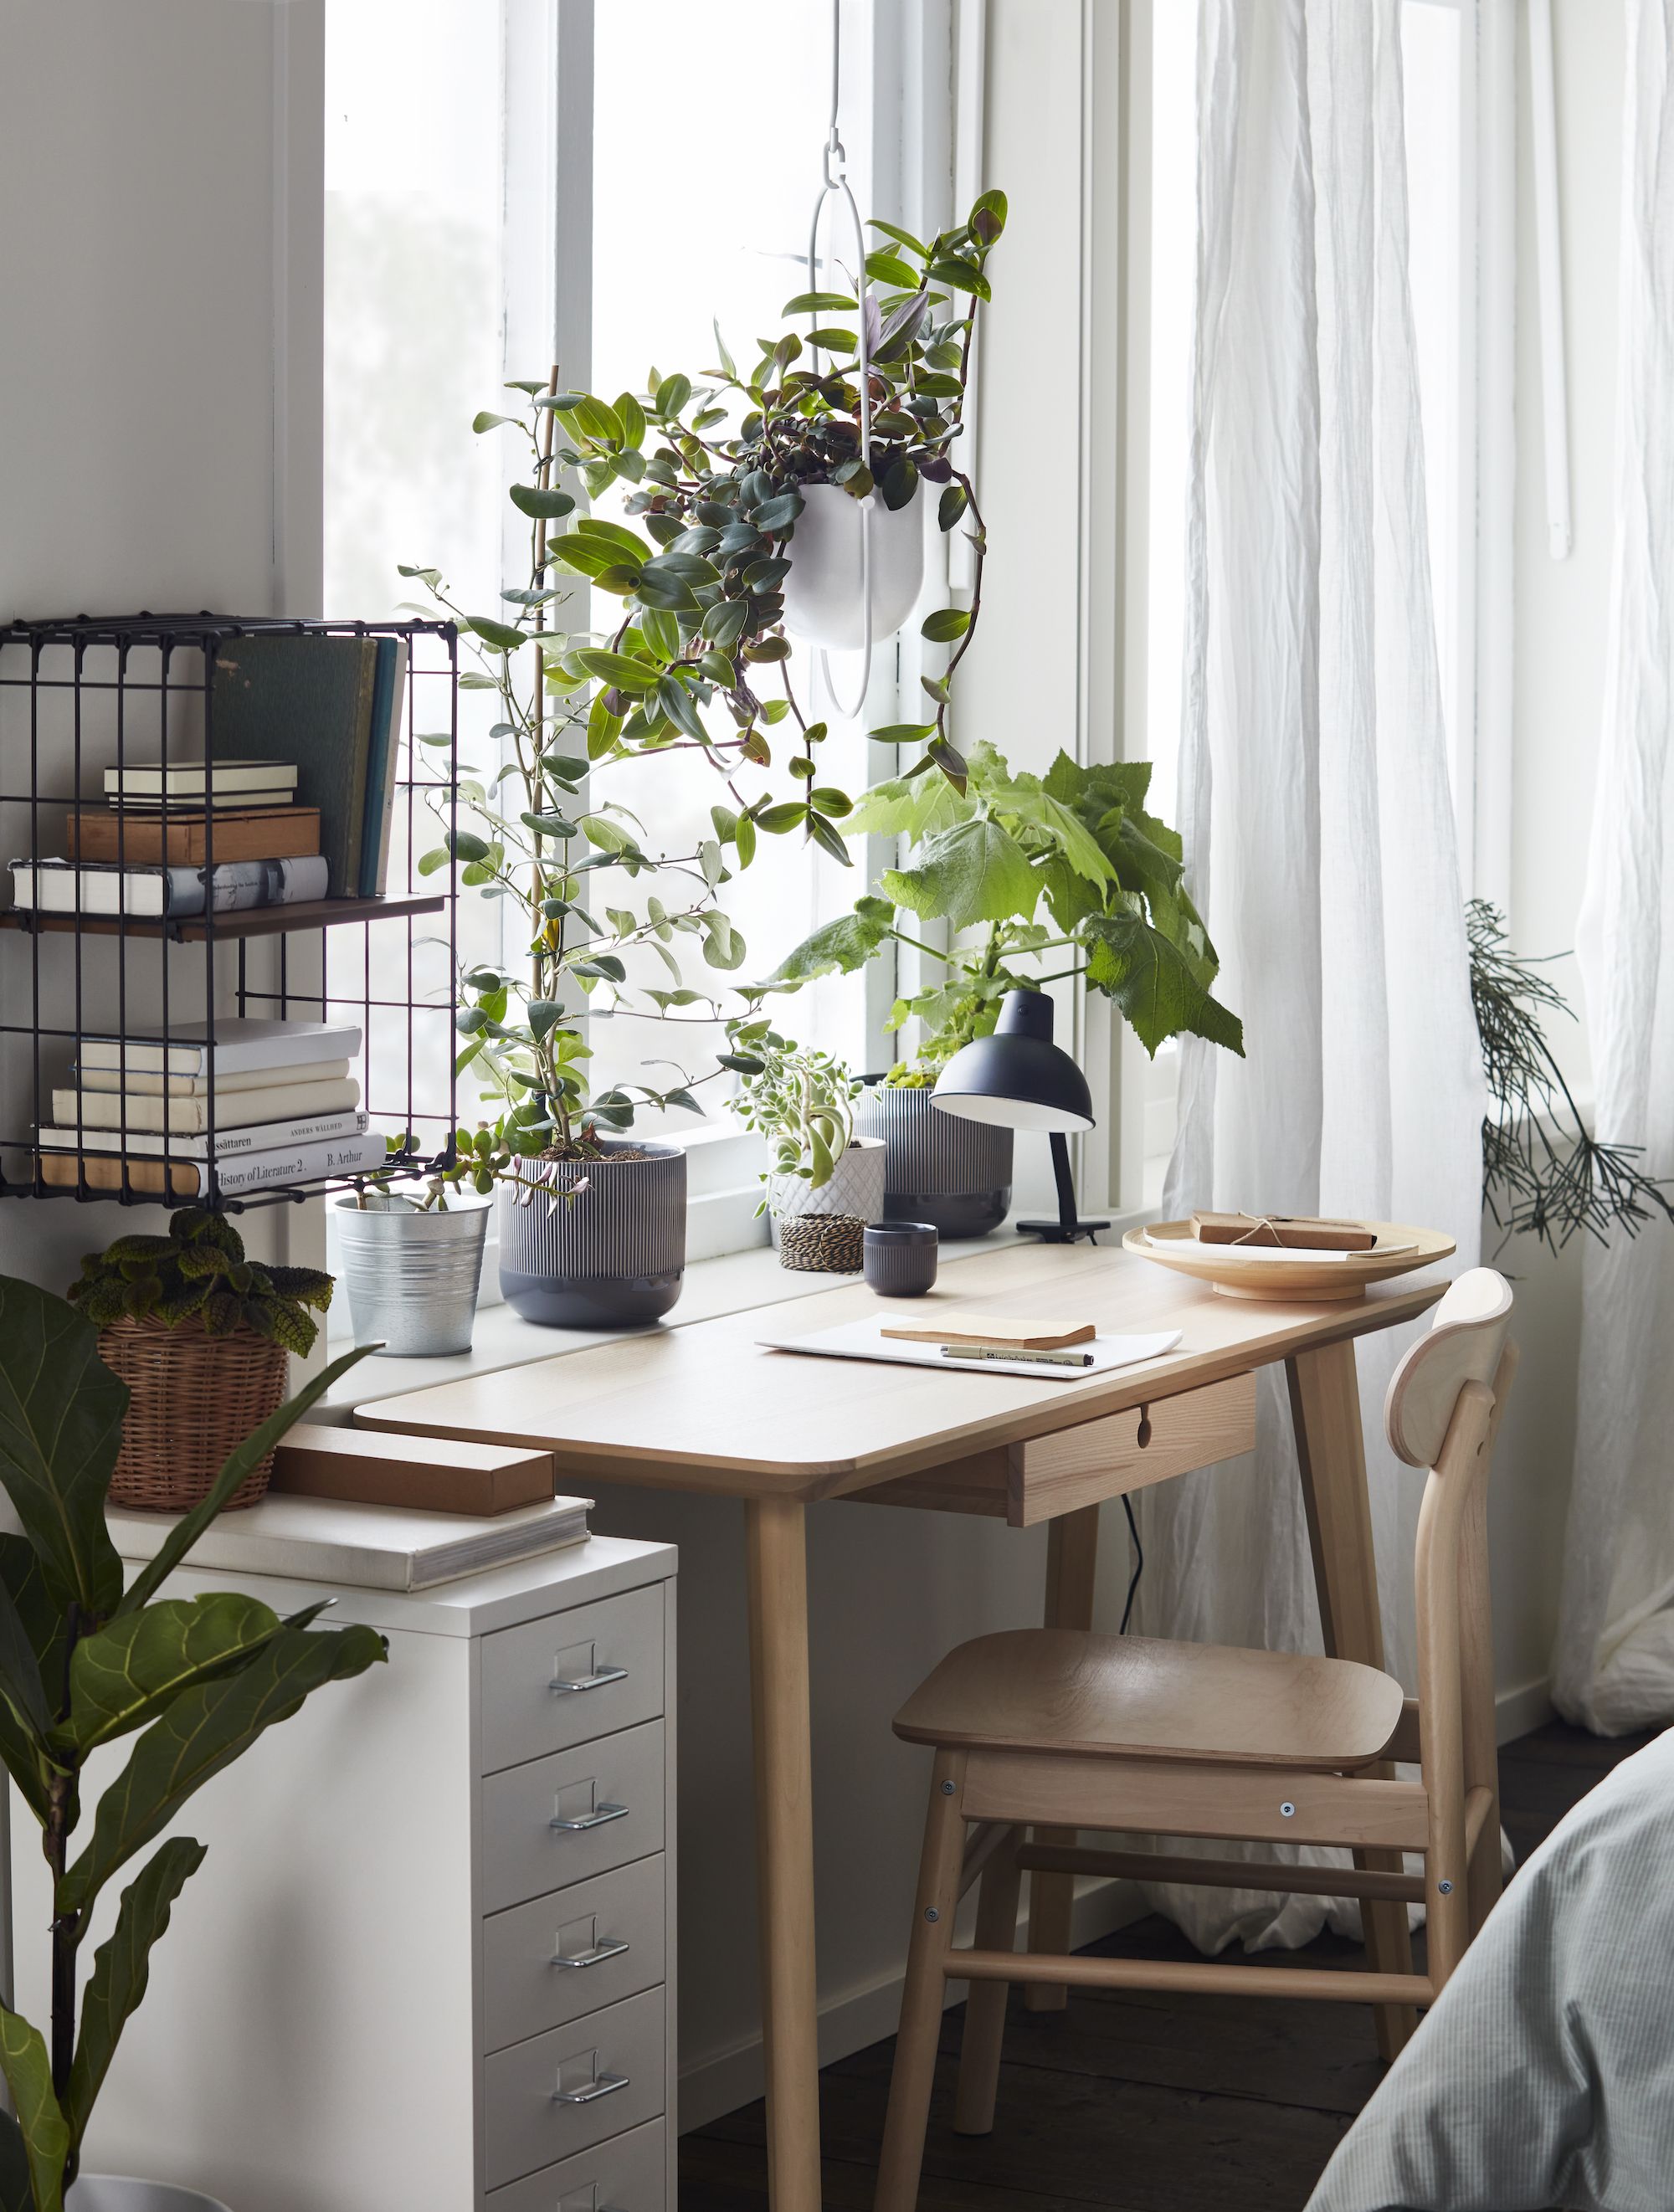 How to Organize an Intentional WFH Office Space to Increase